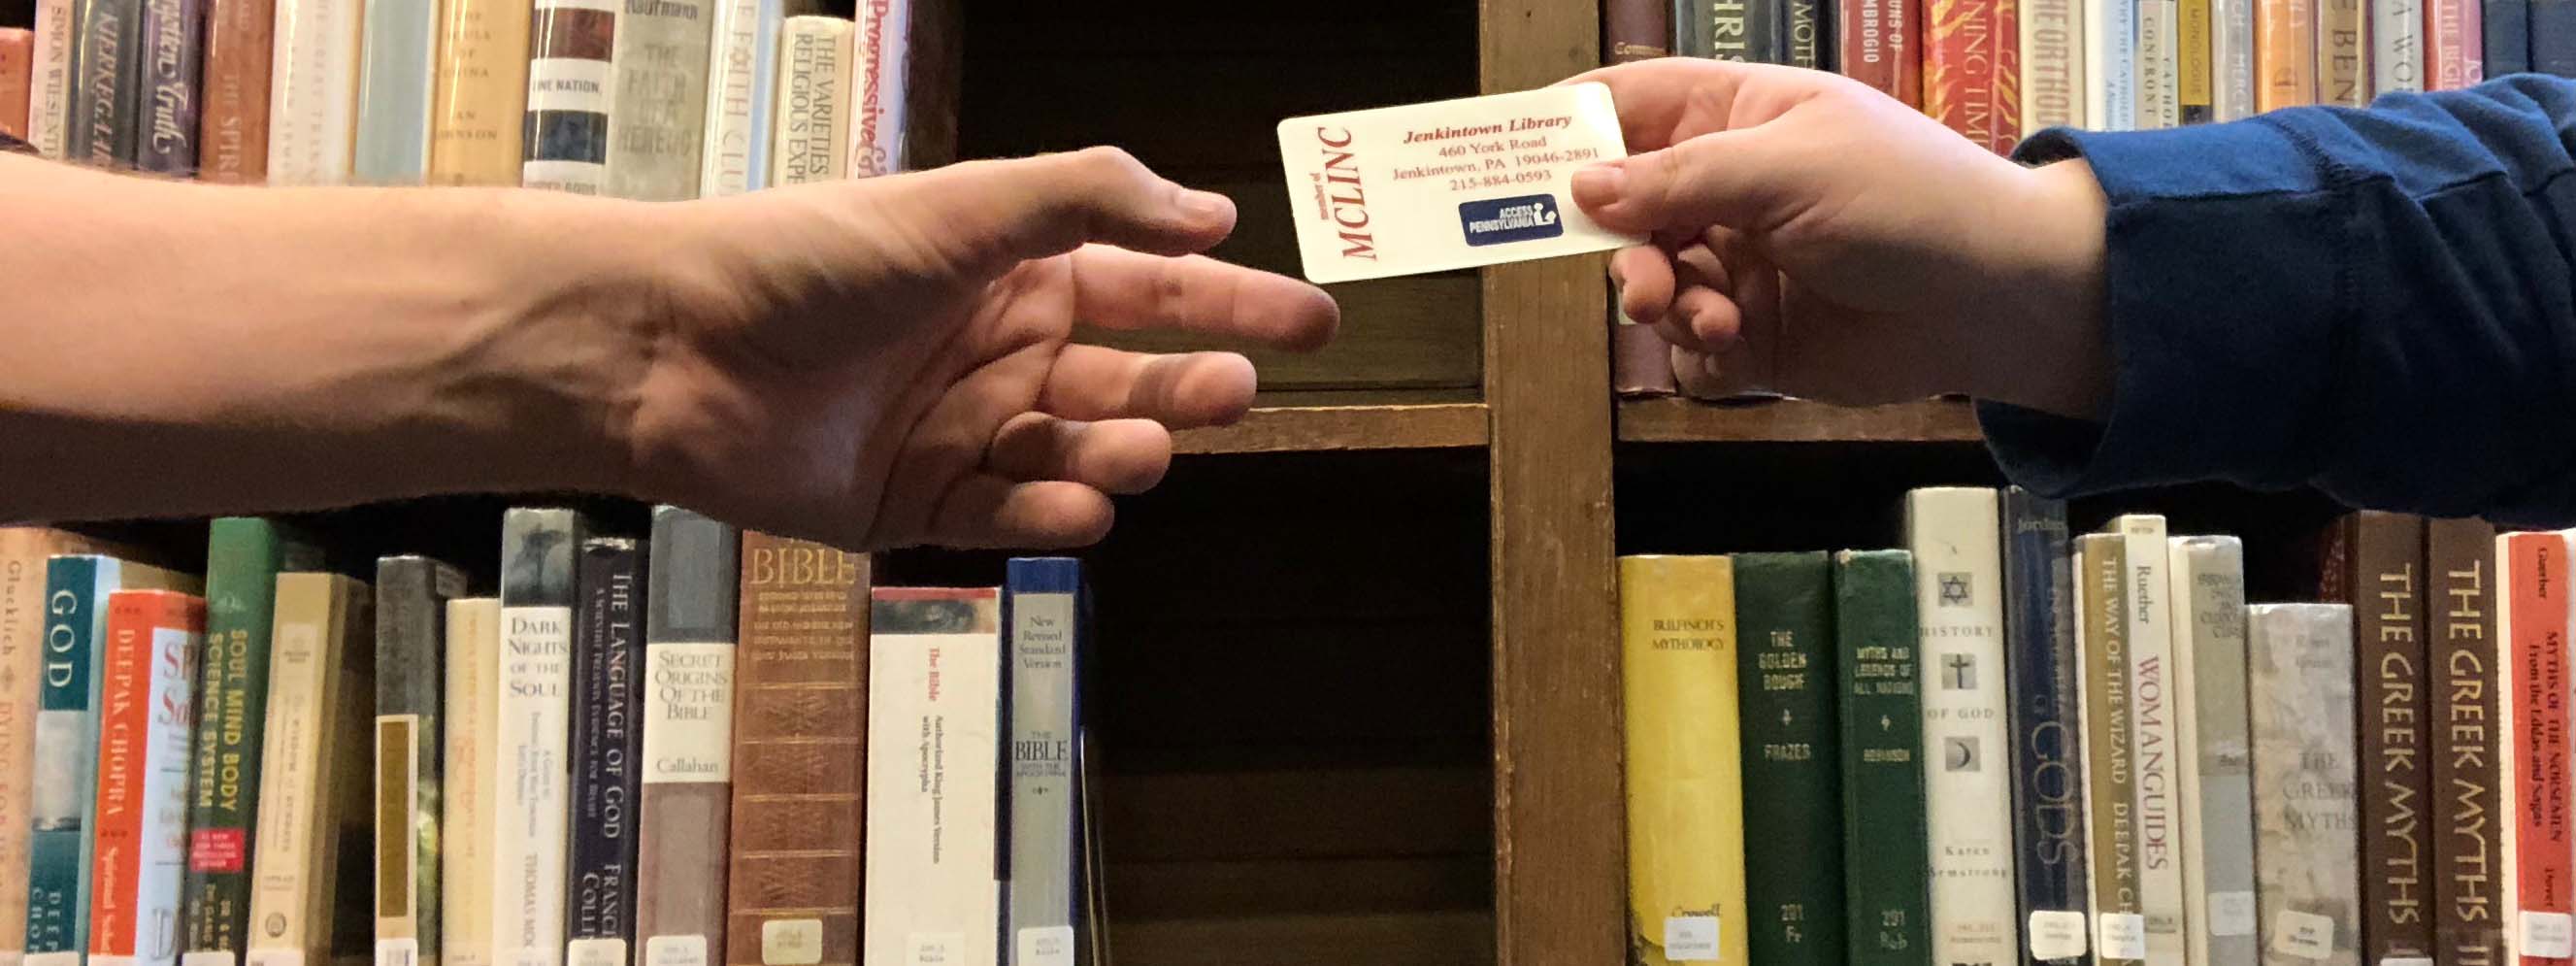 a hand reaching toward a library card being held out 